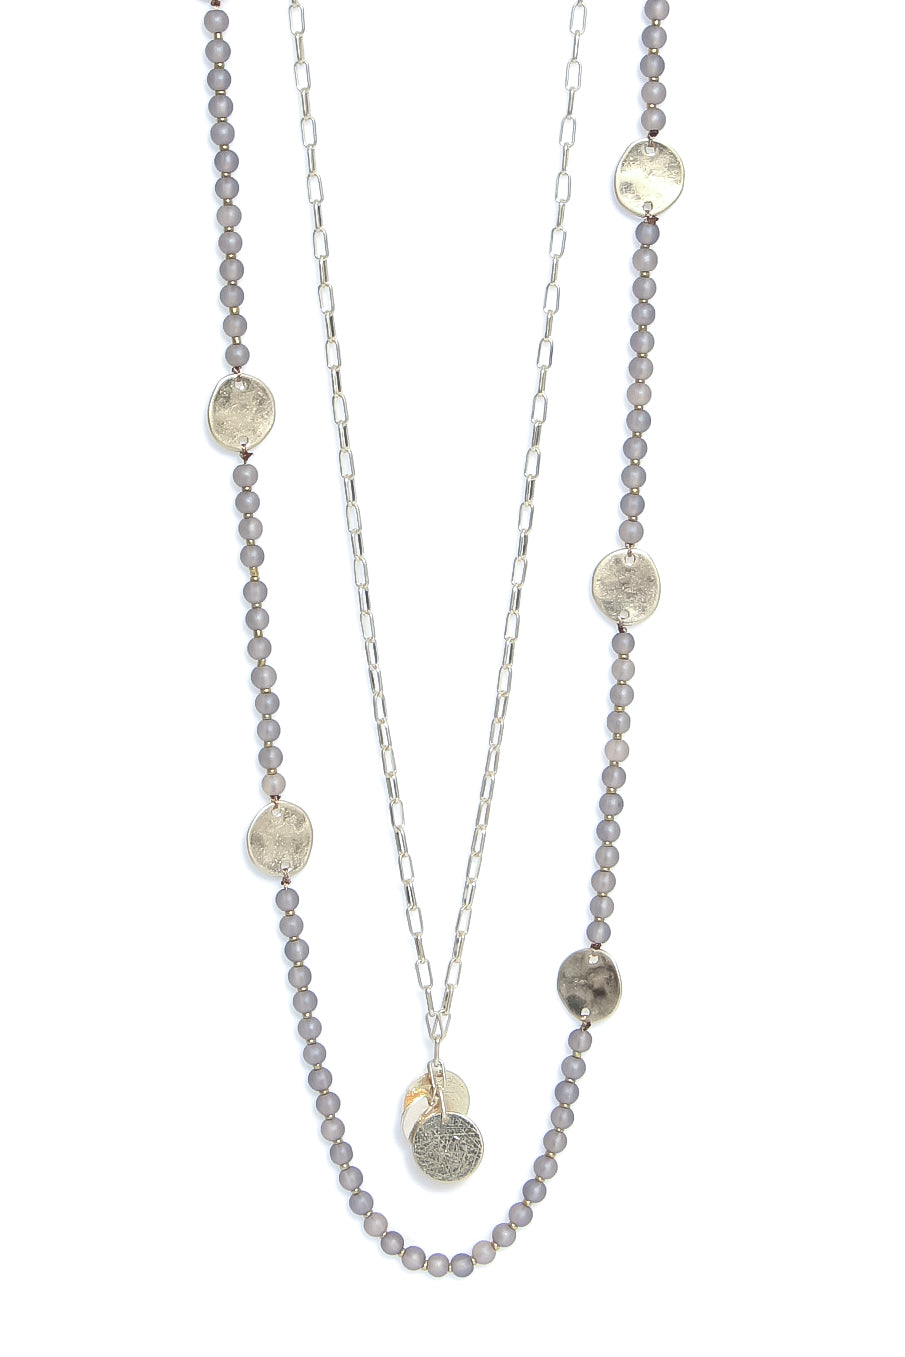 Long Gold Pendant and Bead Layer Necklace - The Tulip Tree Chiddingstone